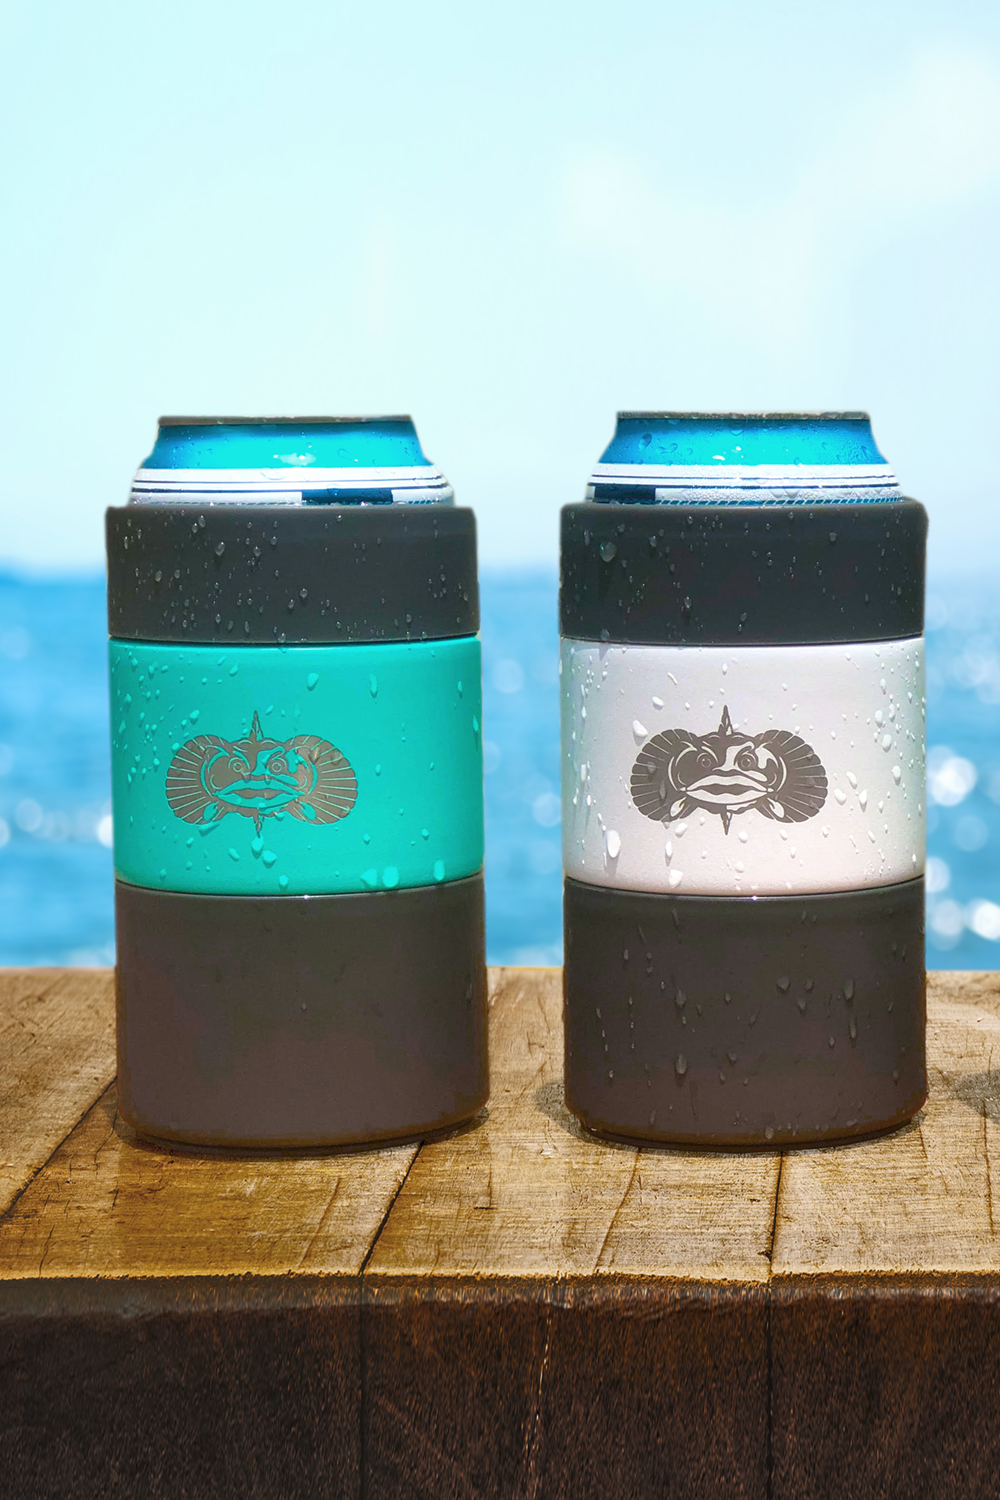  Toadfish Slim Non-Tipping Can Cooler for 12oz Cans